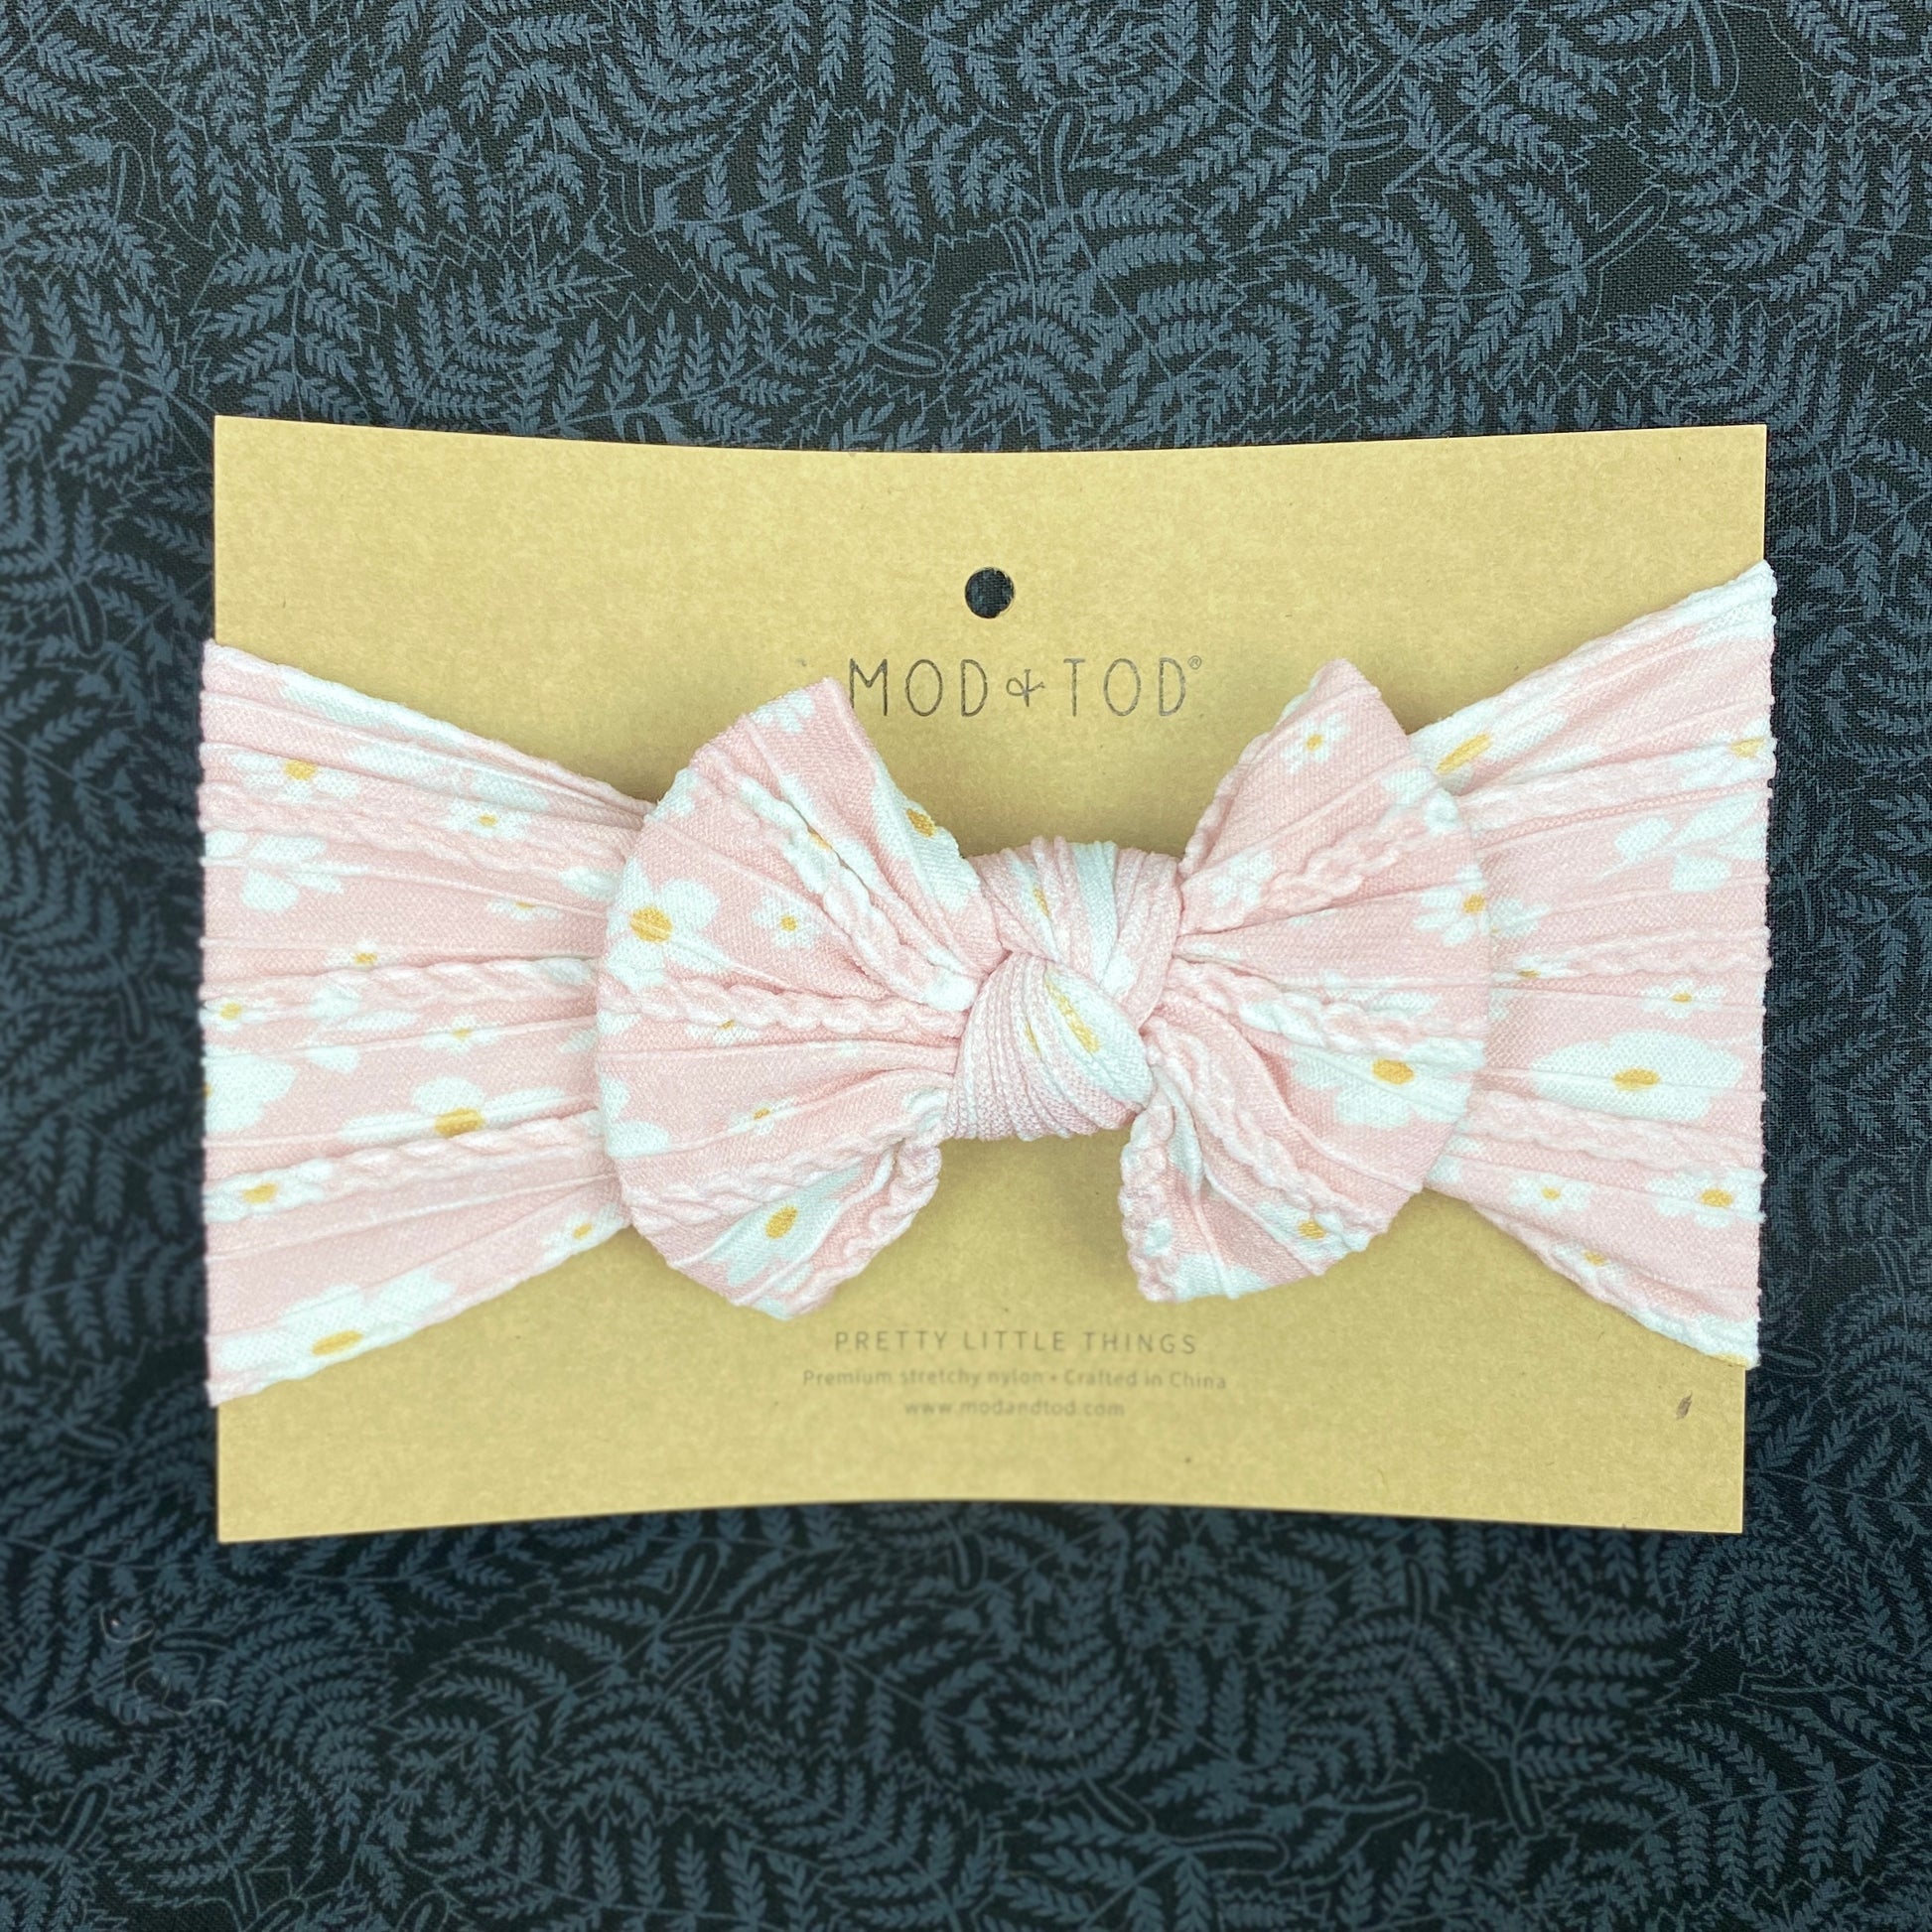 Cable Bow headband for baby and toddler